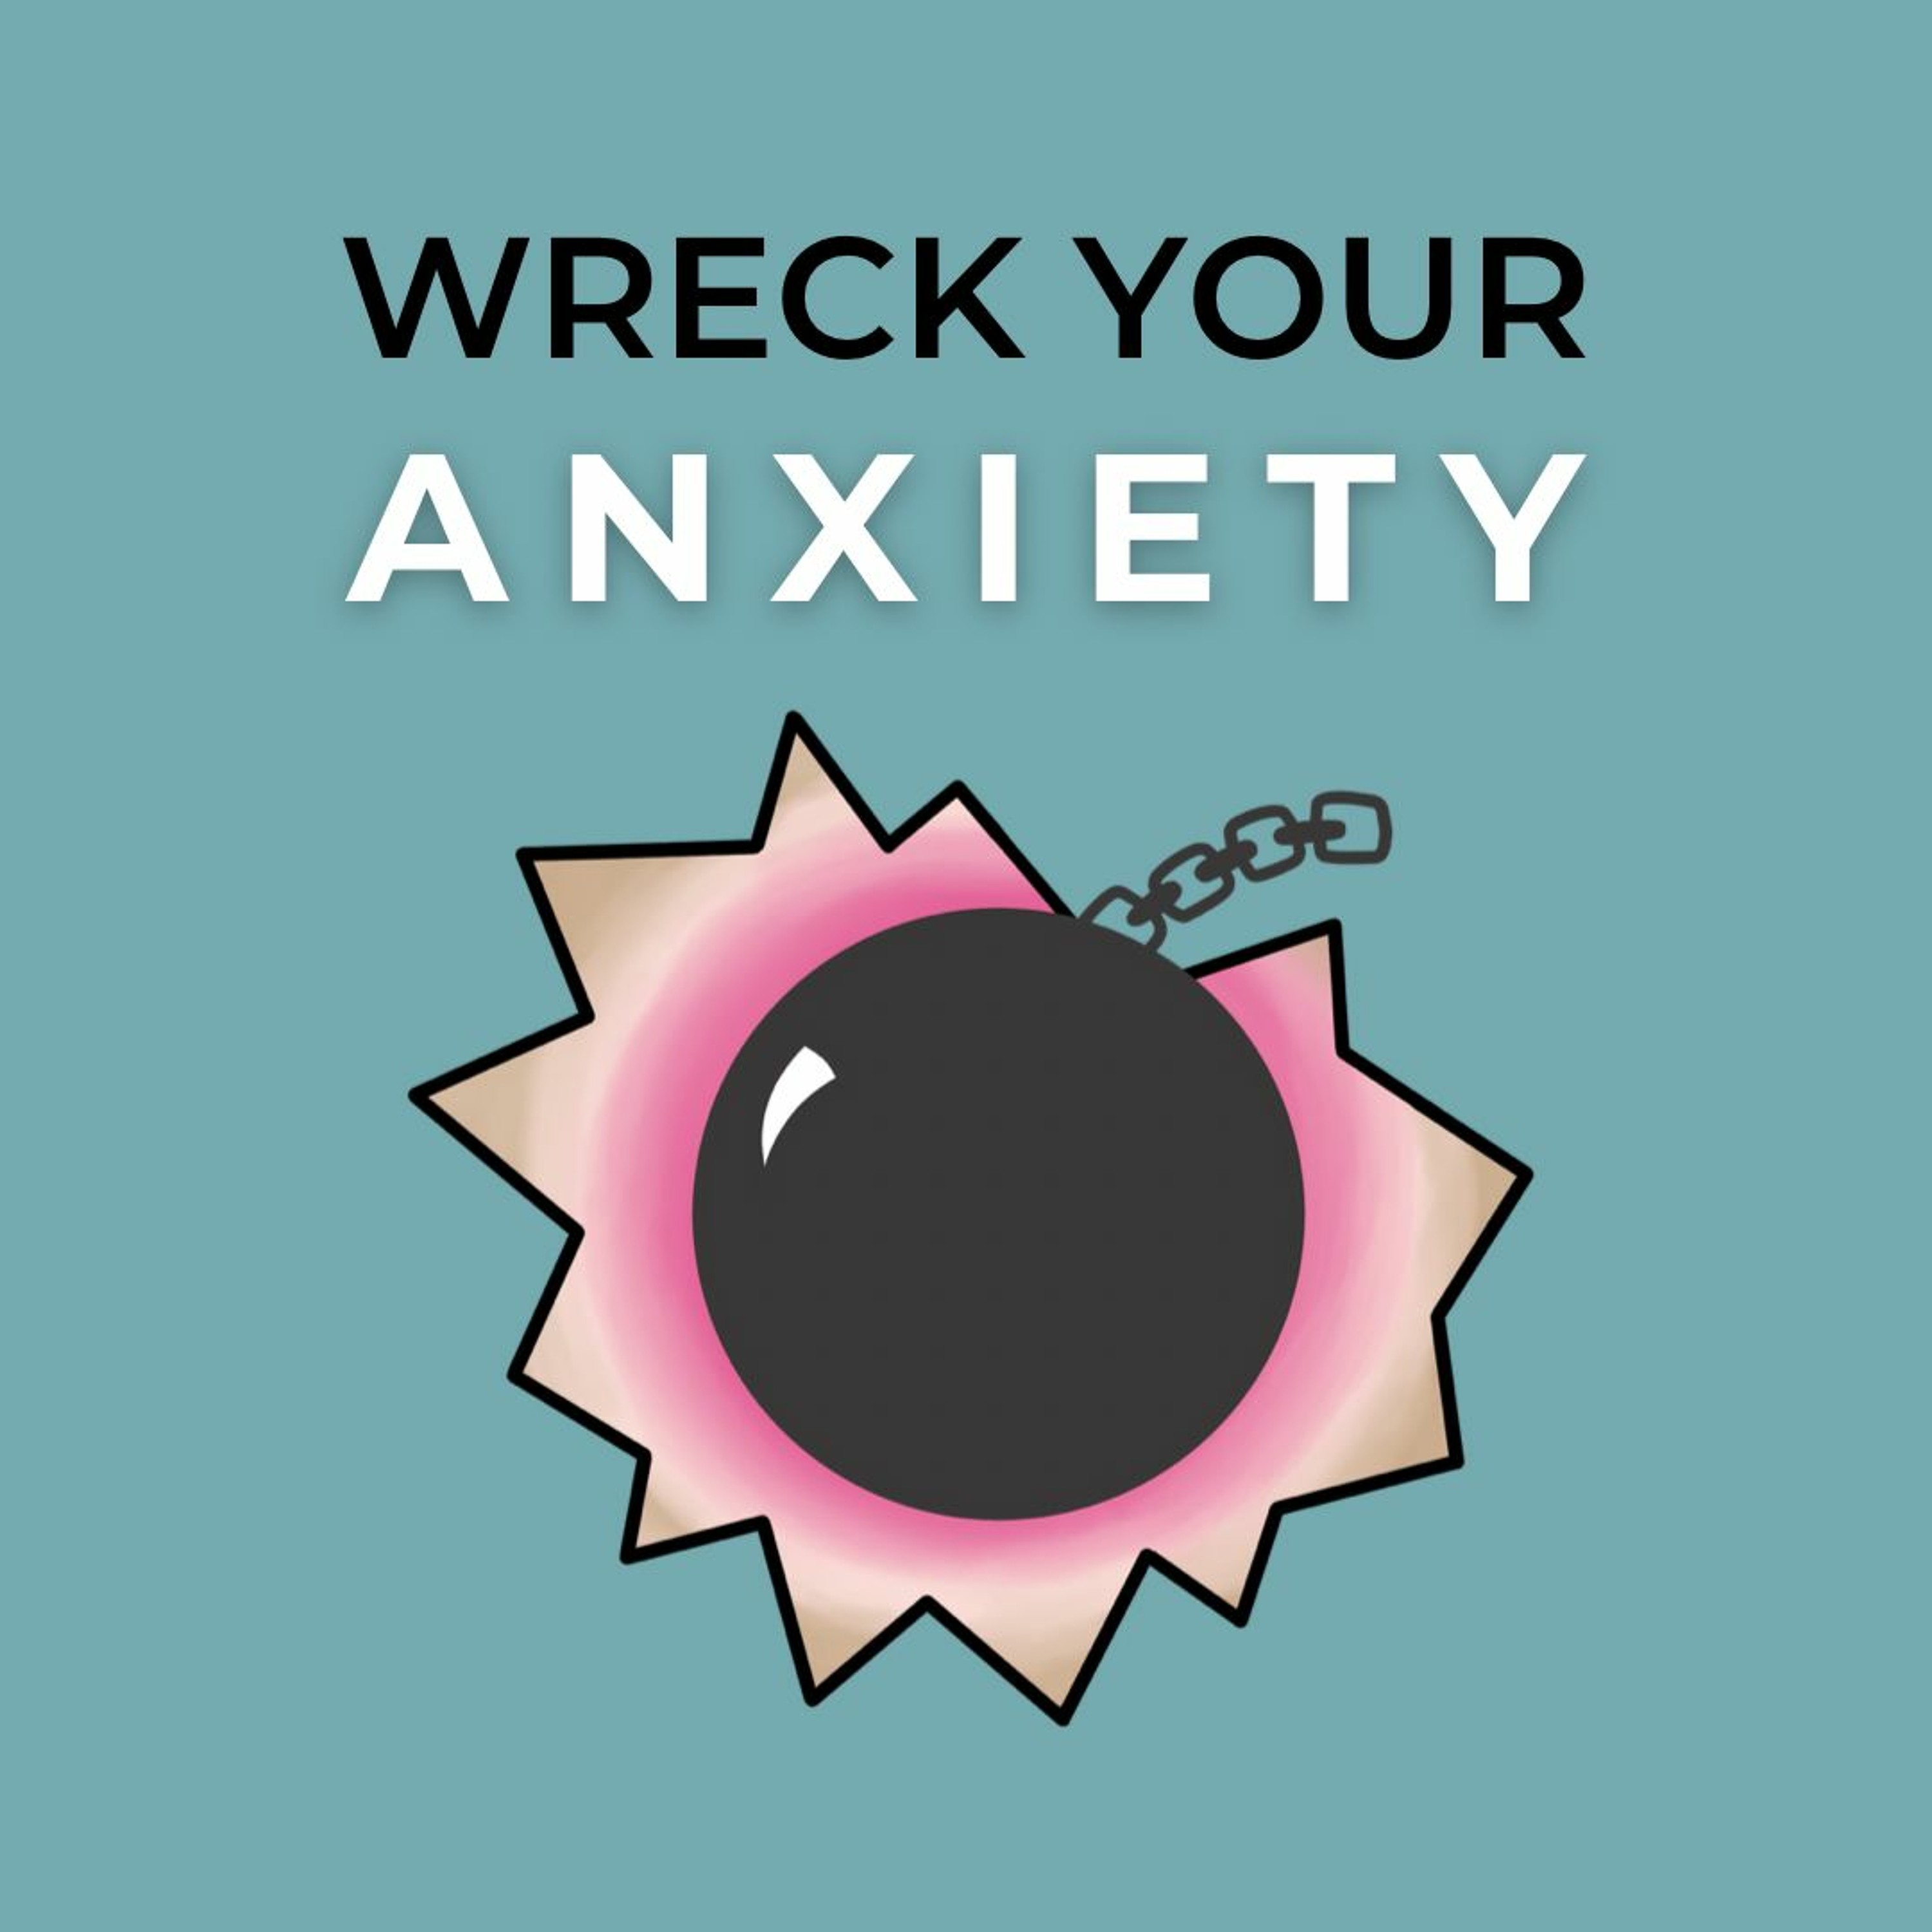 BONUS: How To WRECK YOUR ANXIETY